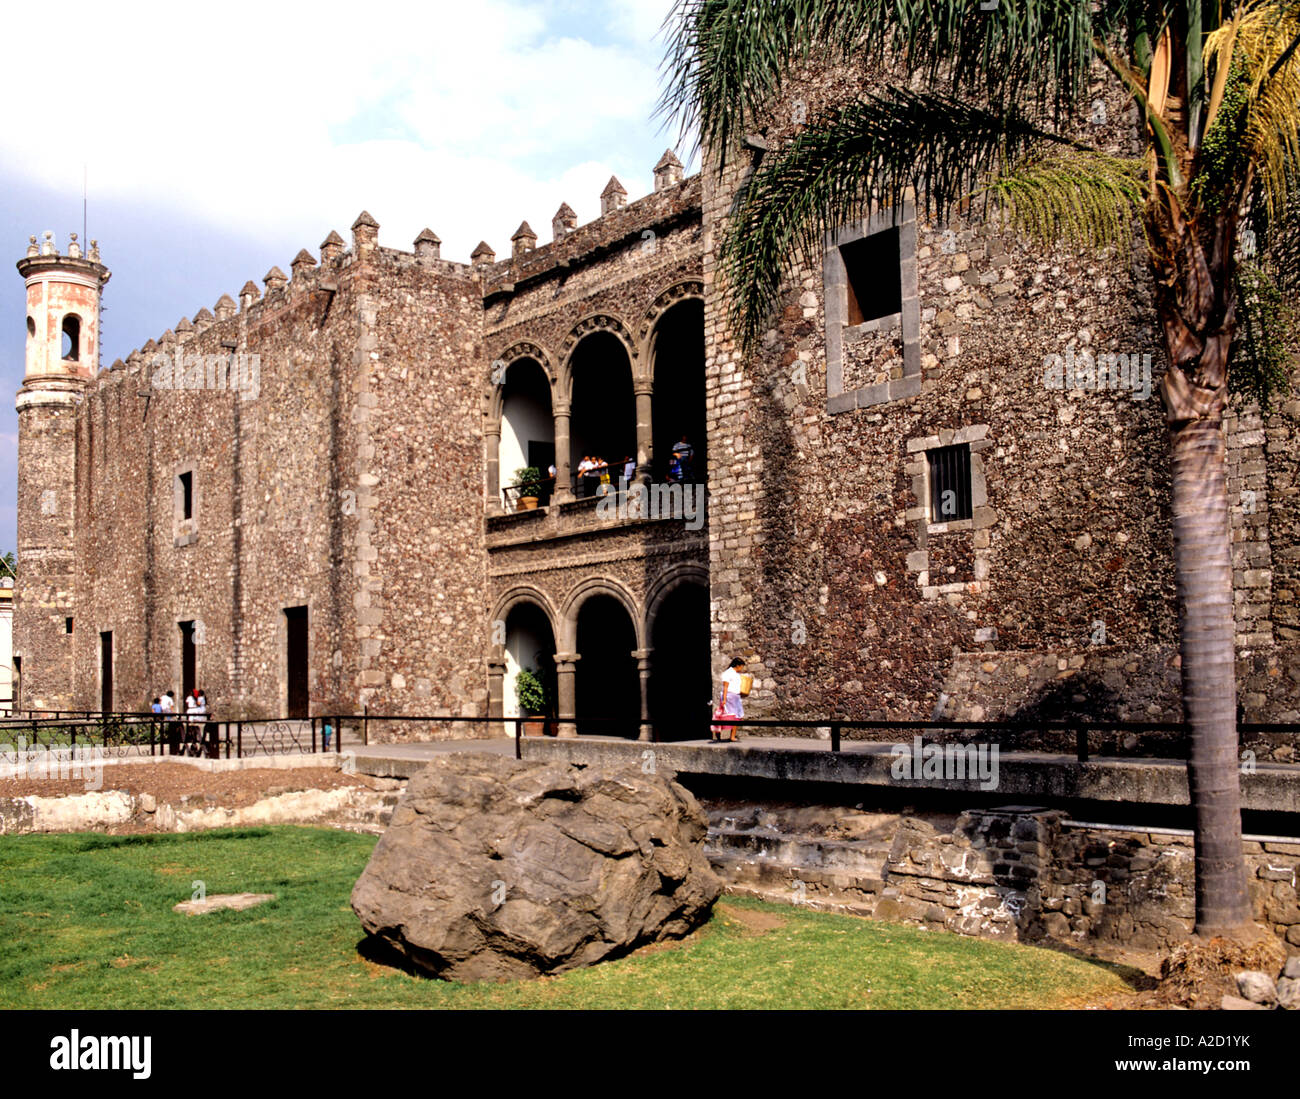 Collection 99+ Images what spanish conquistador built a palace in cuernavaca mexico Updated